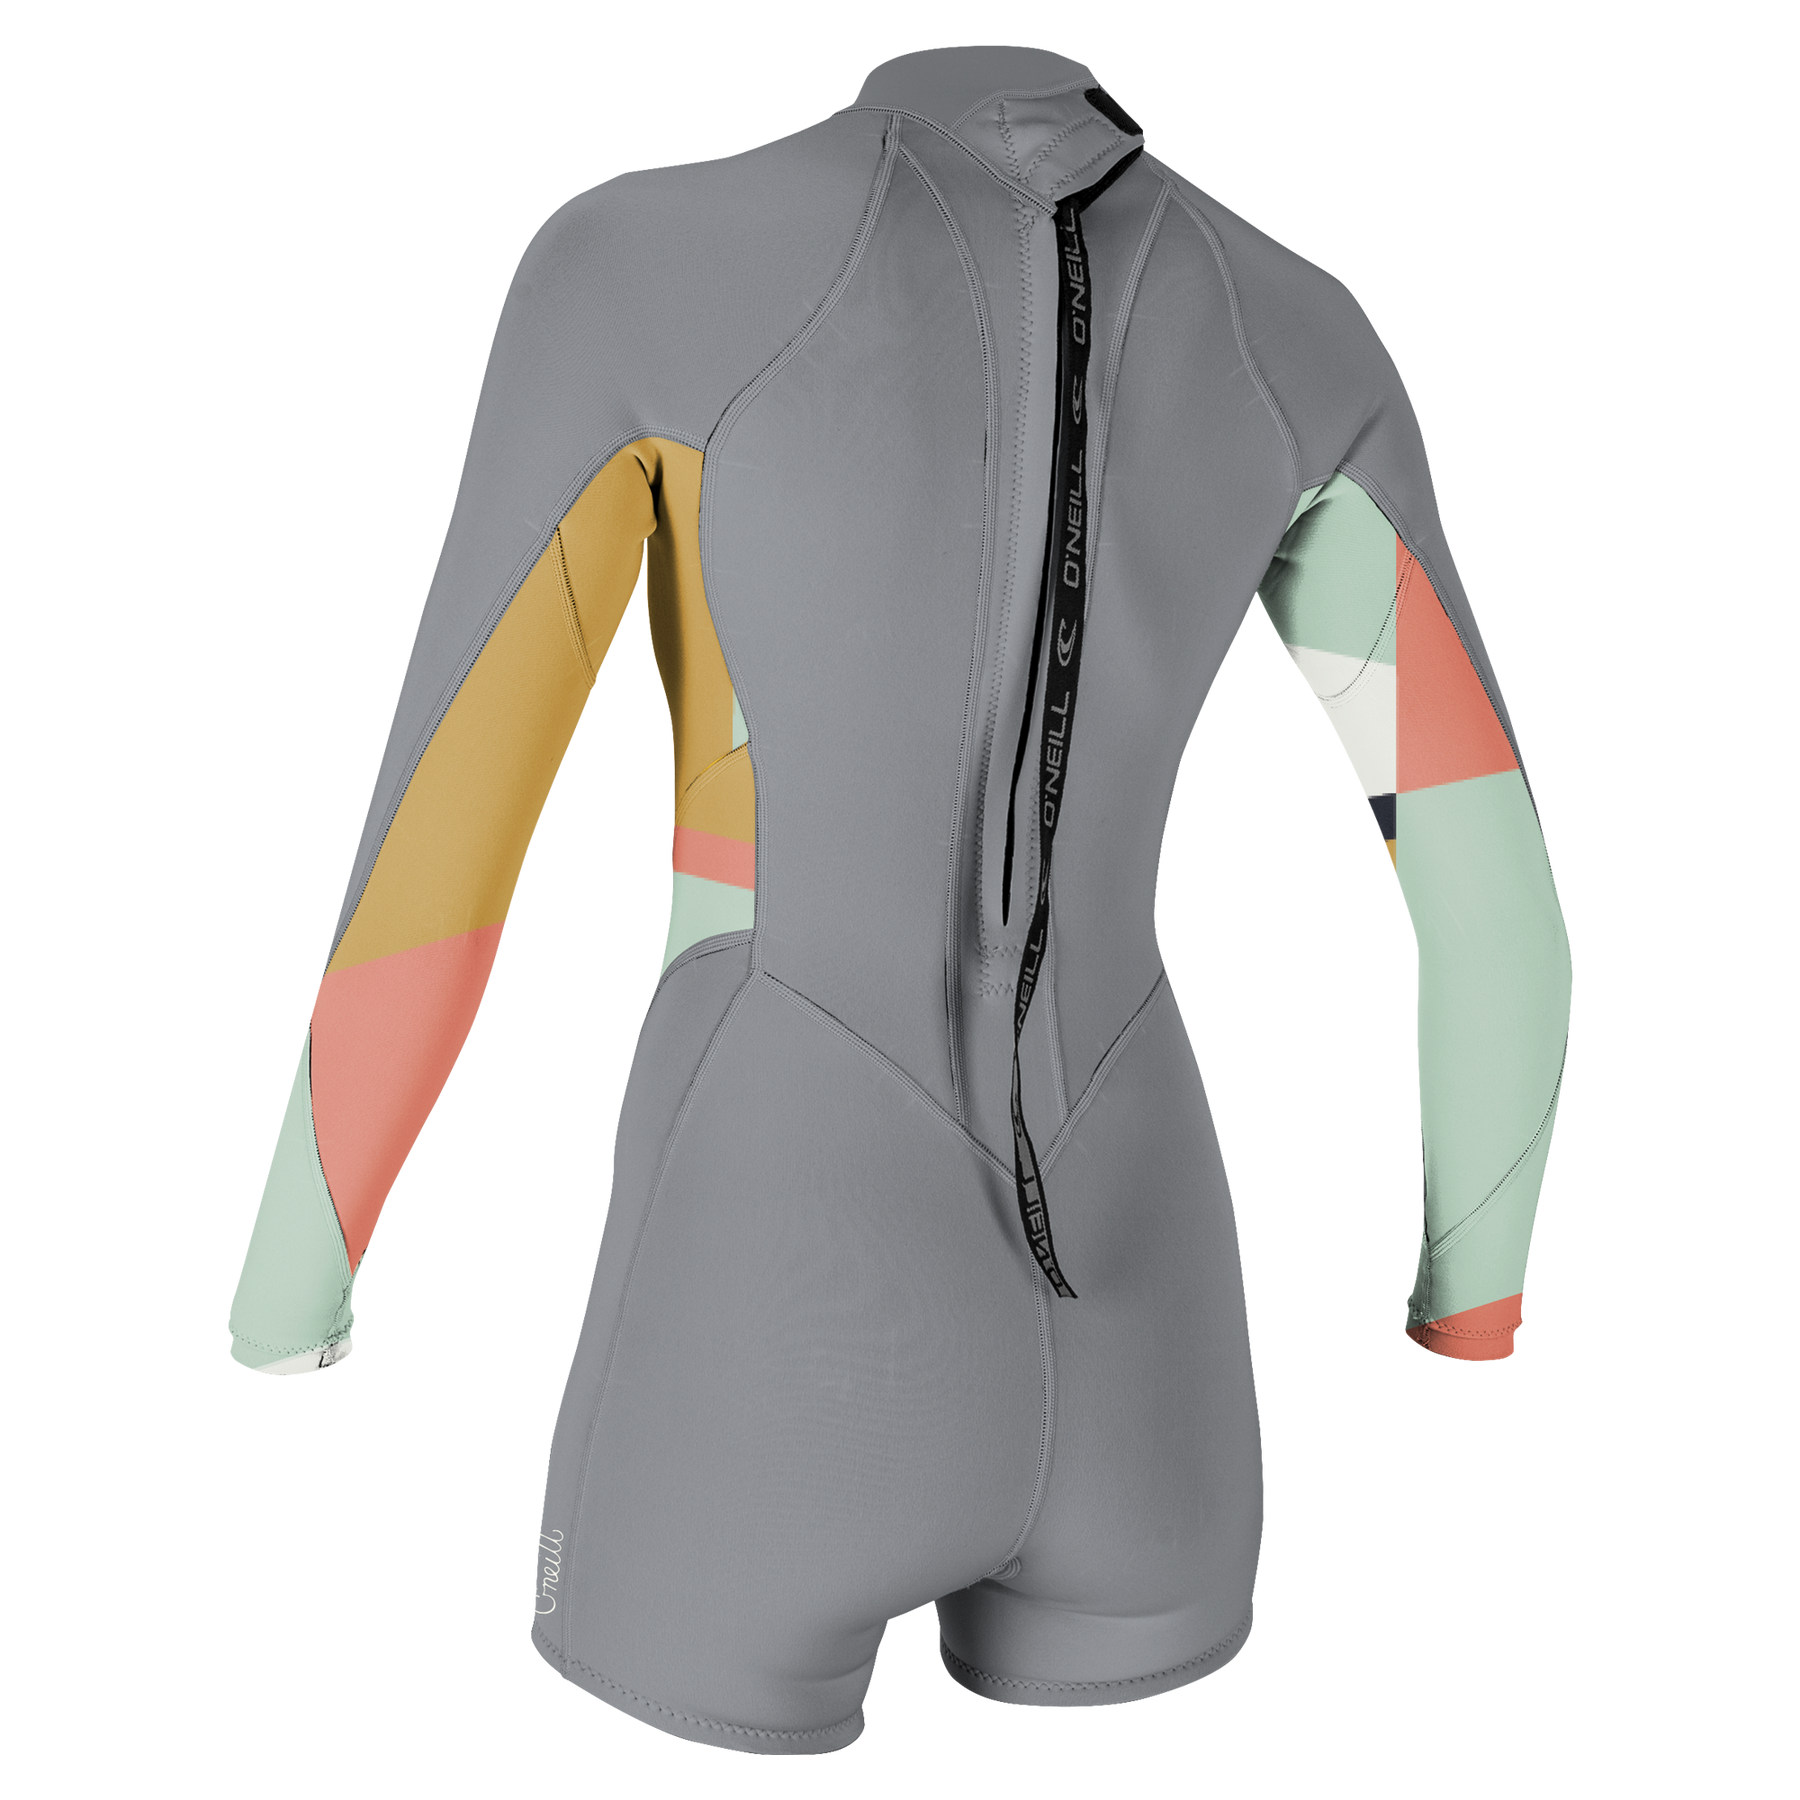 – Wetsuit Surfdock 2/1mm Sleeved Back Watersports Zip Shorty Long O\'Neill Bahia Womens